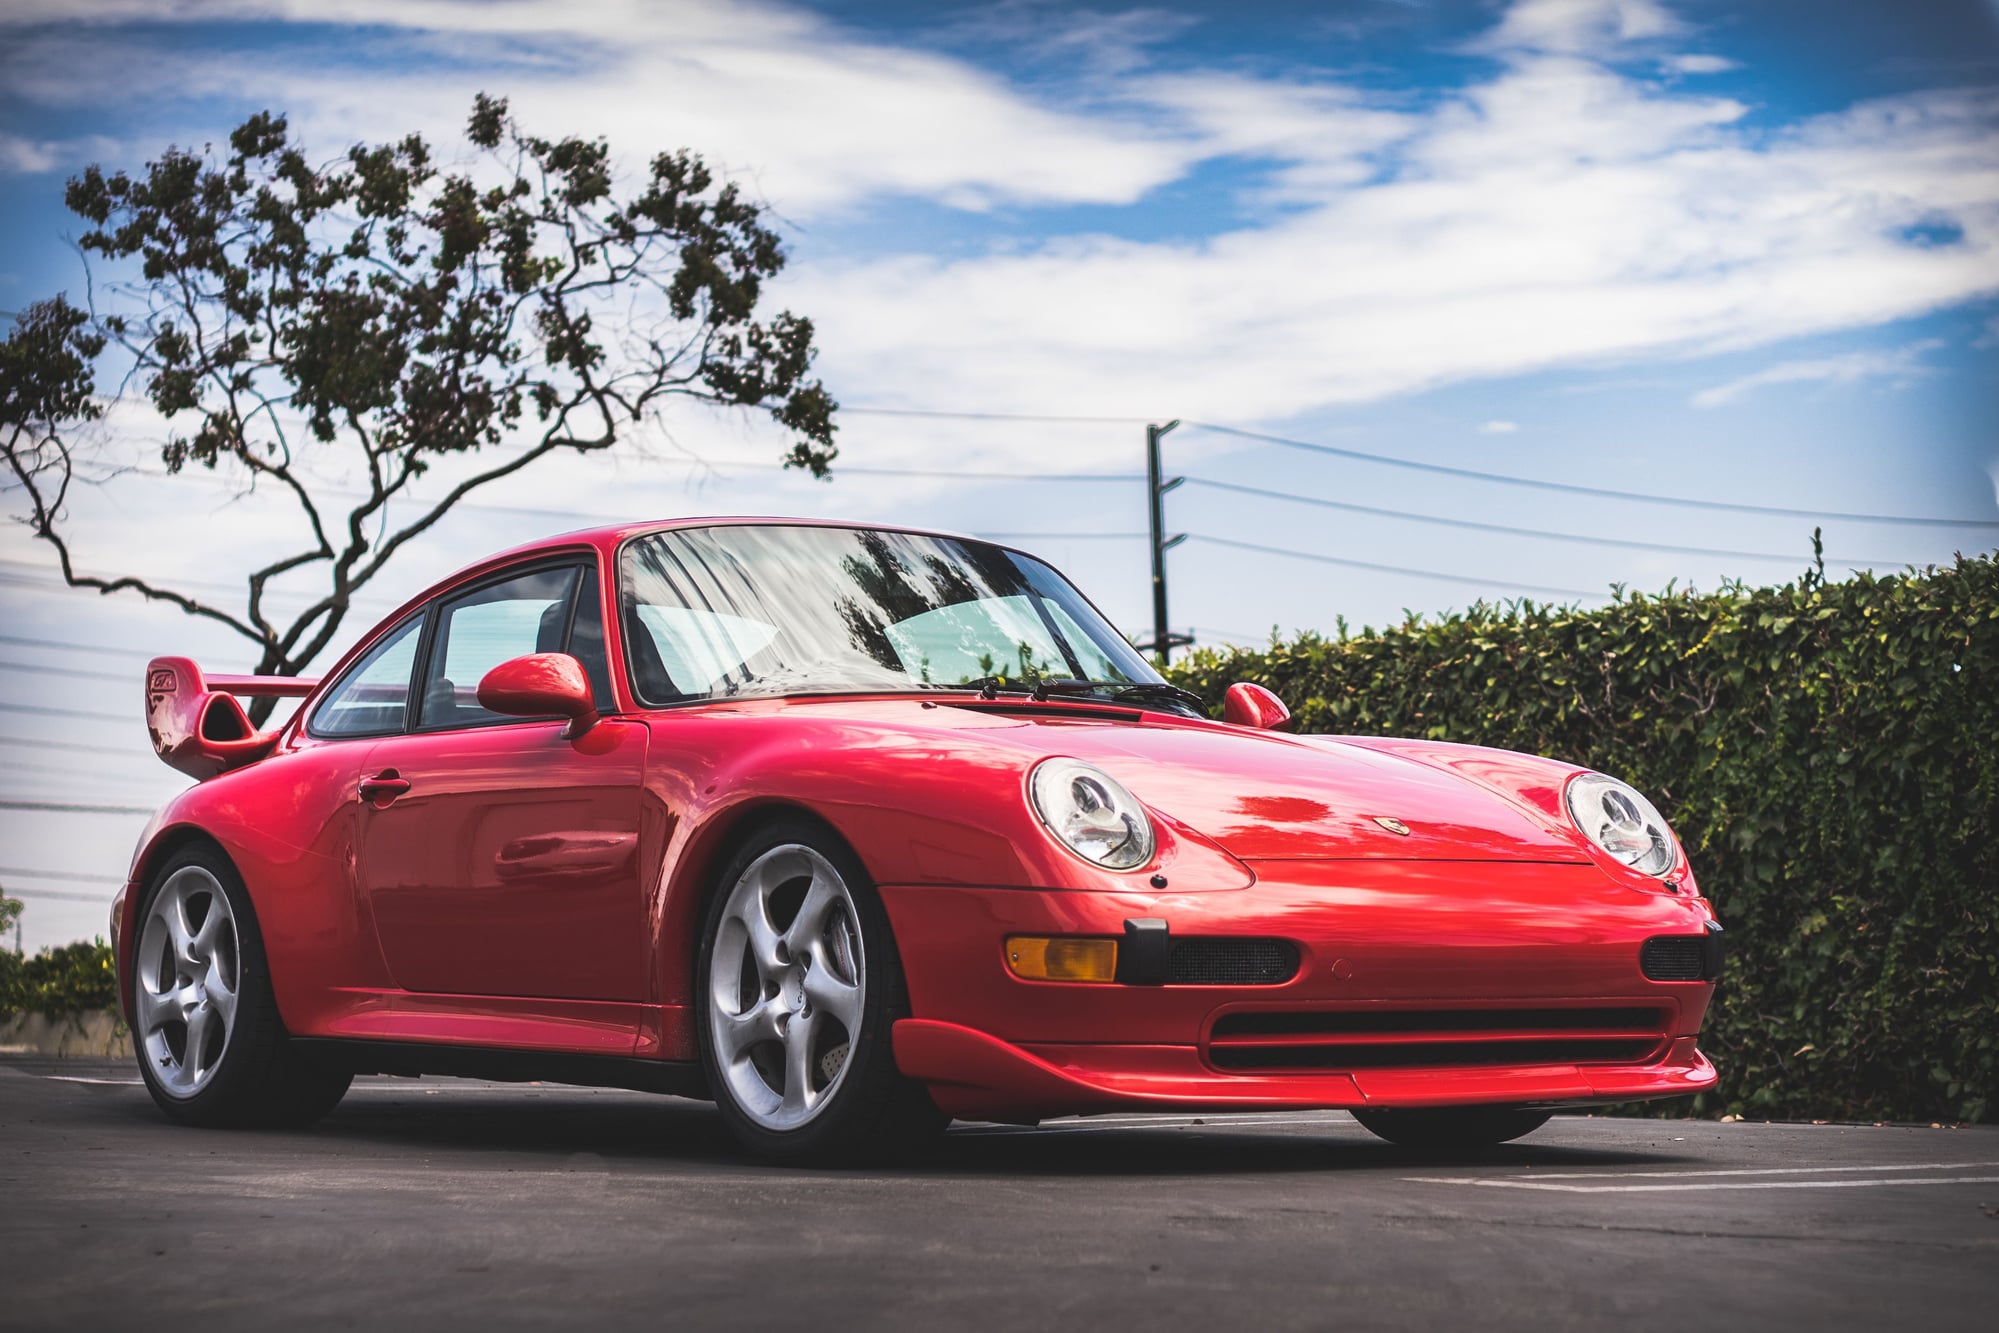 1996 Porsche 911 - 1996 Porsche 993 Twin Turbo in Guards Red with upgrades. - Used - VIN WP0AC2991TS375204 - 53,000 Miles - 6 cyl - AWD - Manual - Coupe - Red - Costa Mesa, CO 92626, United States